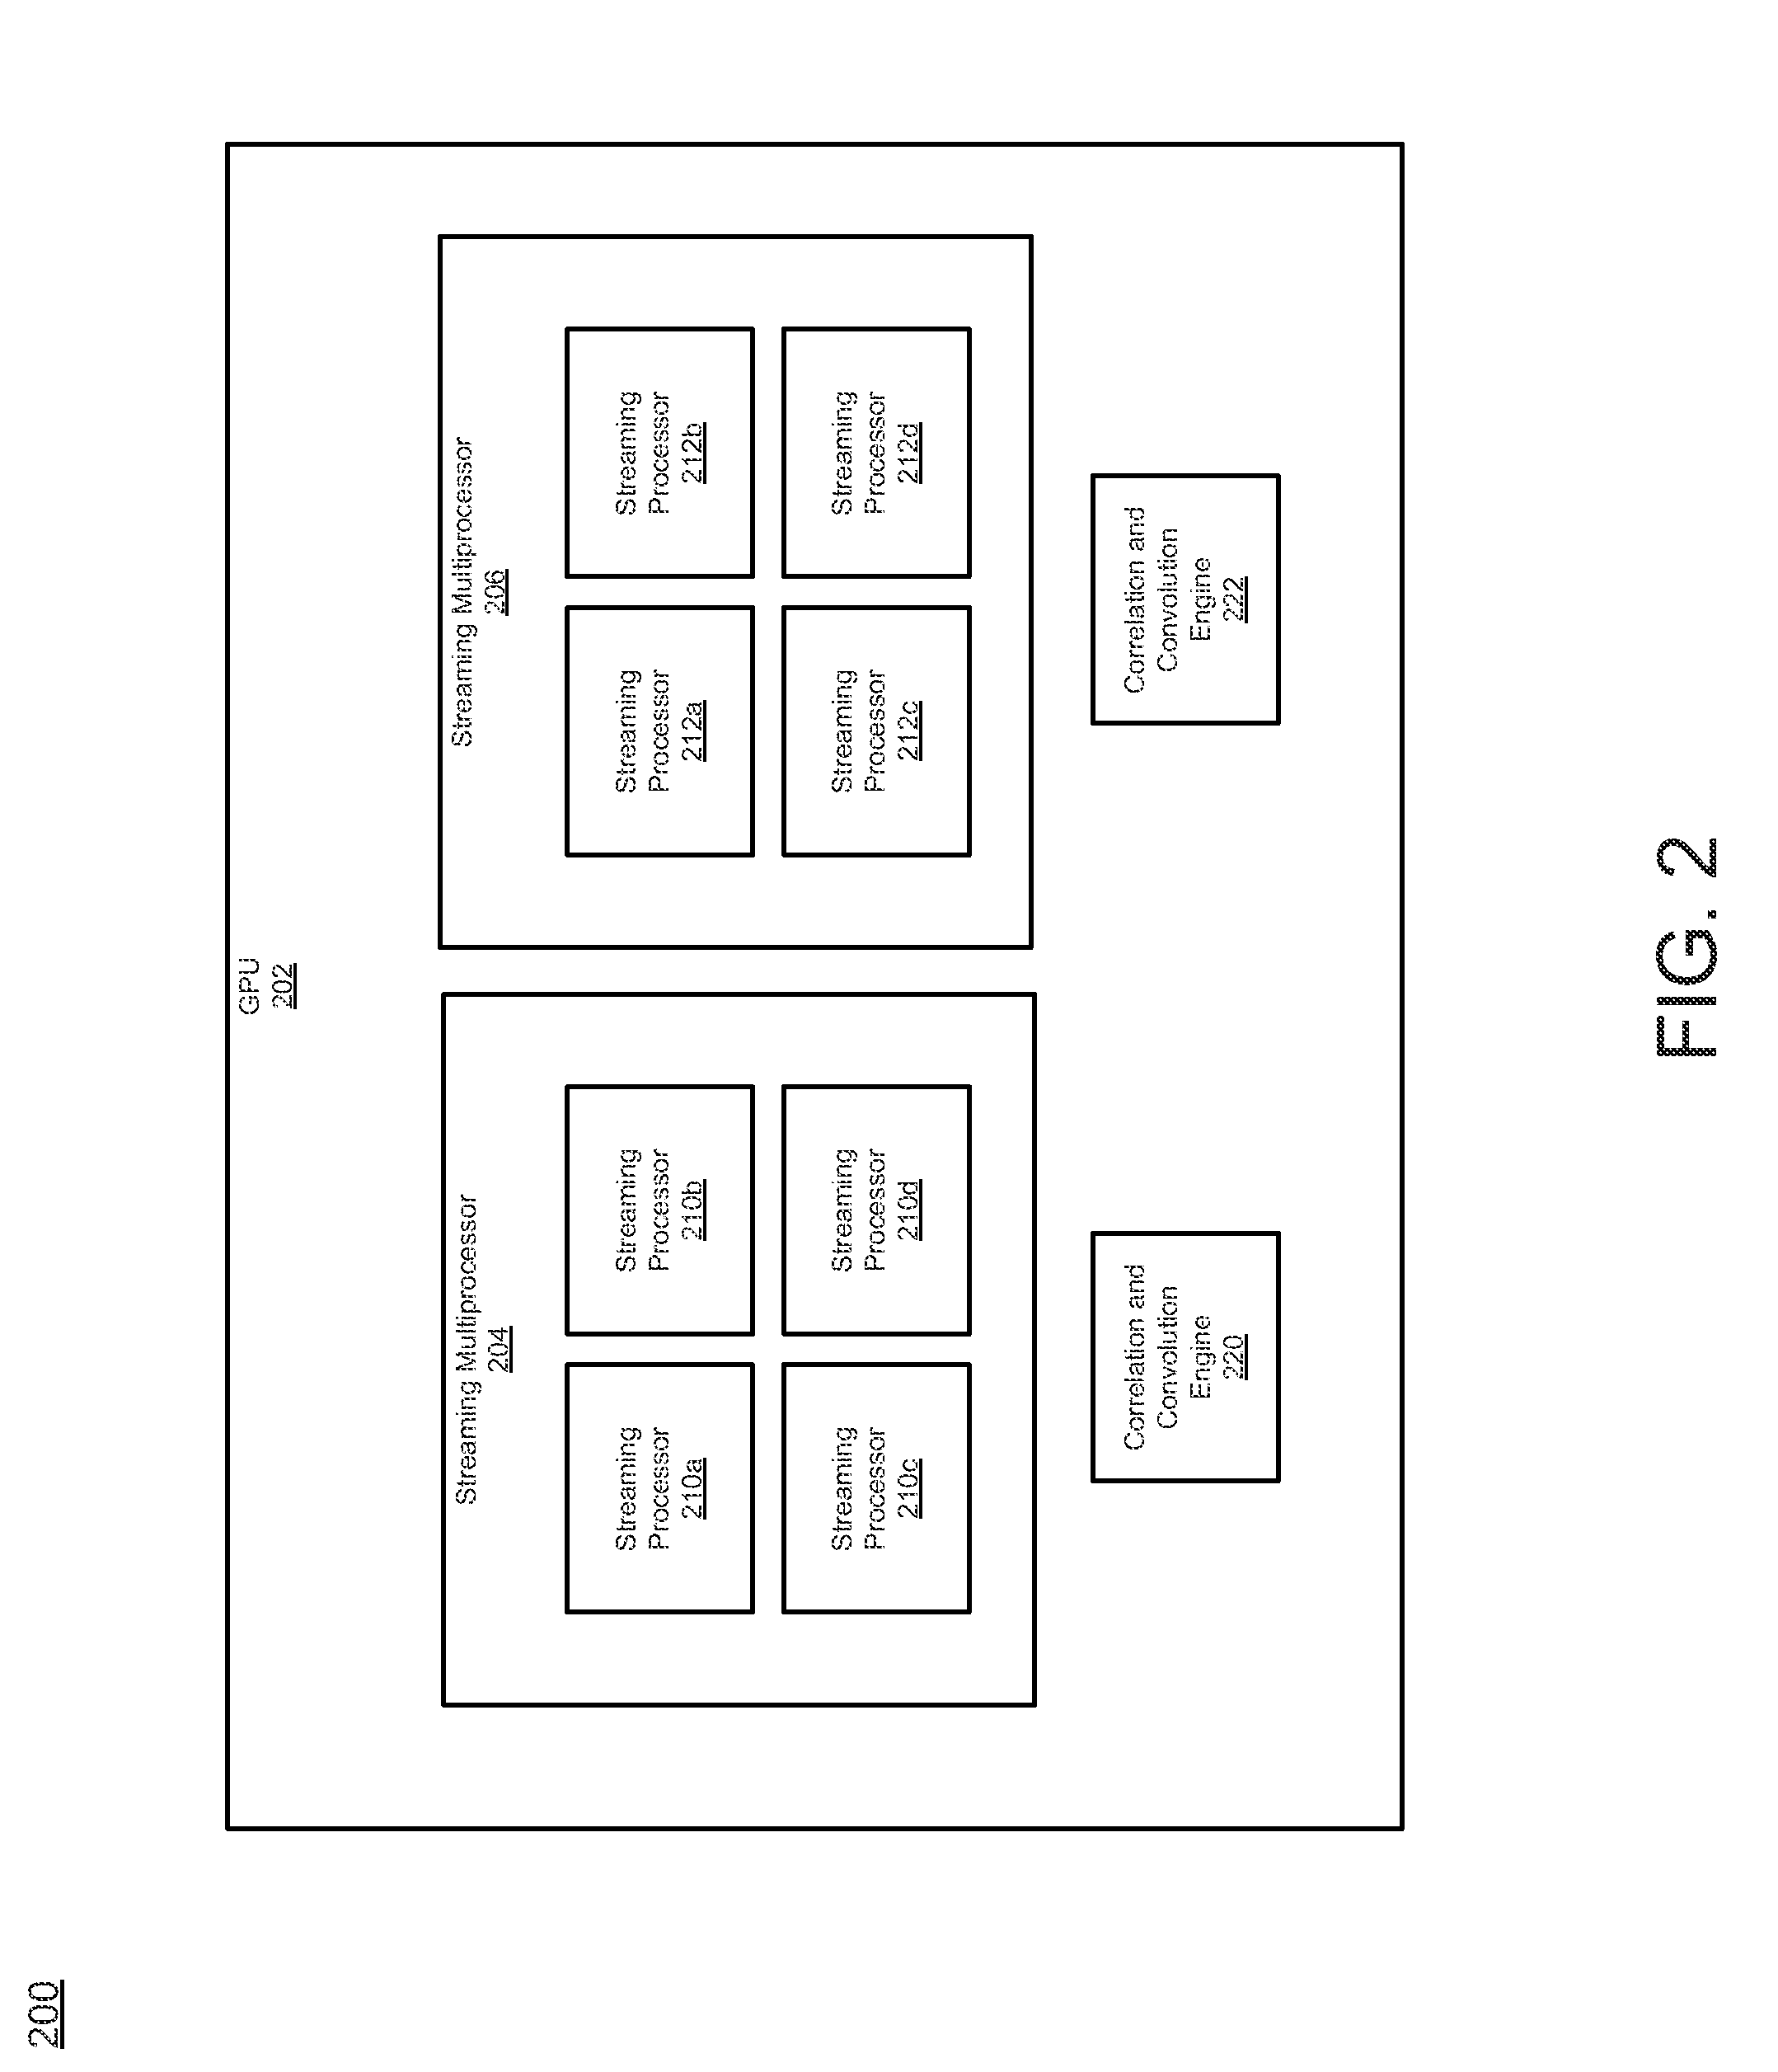 Parallel processor with integrated correlation and convolution engine